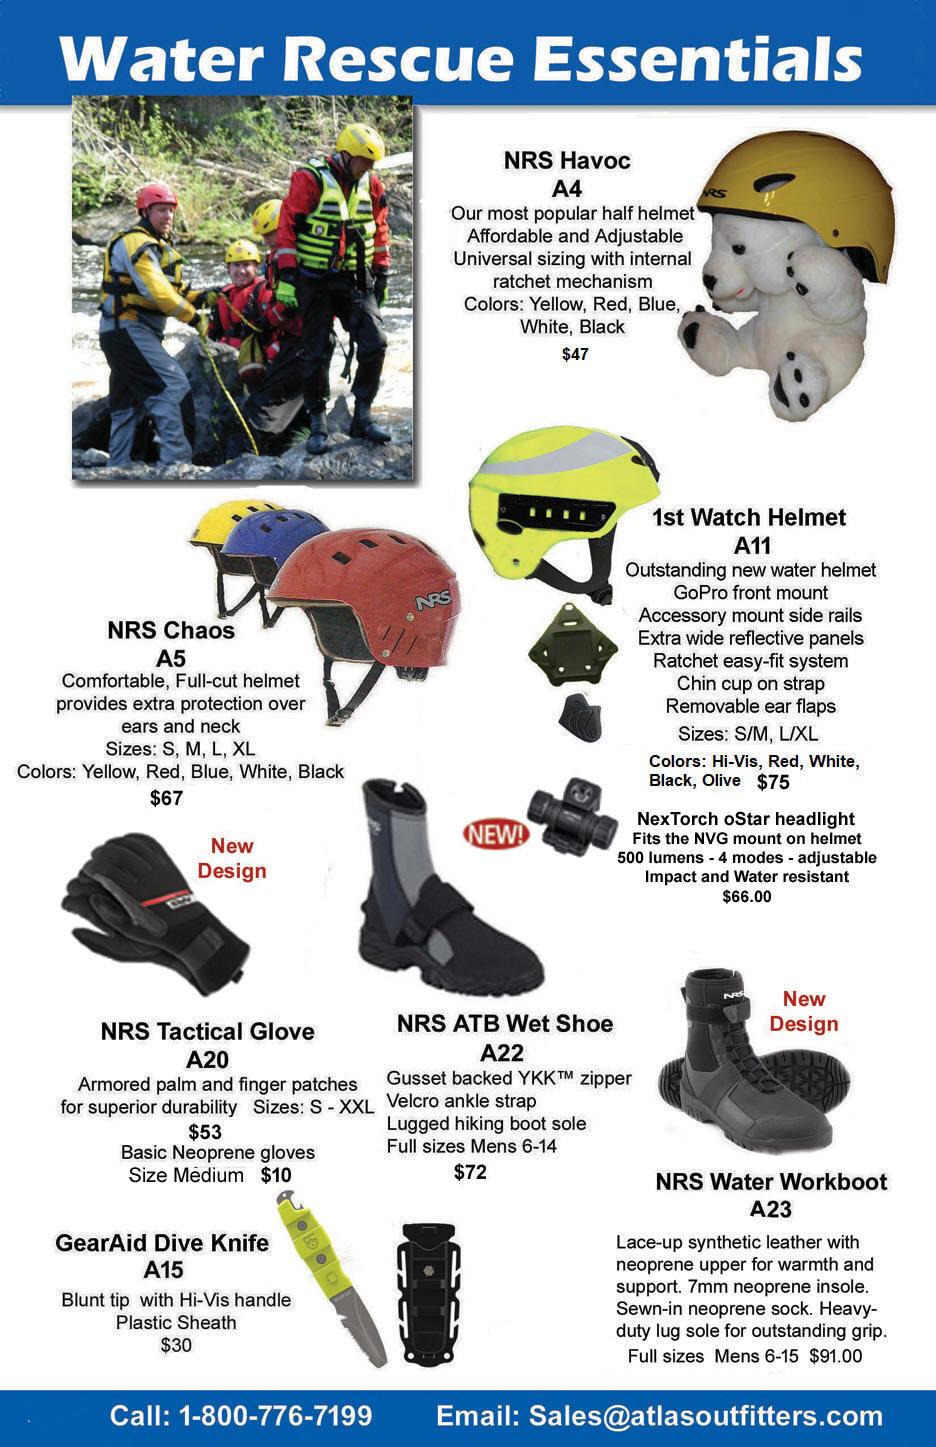 water rescue helmets, boots, gloves, knife